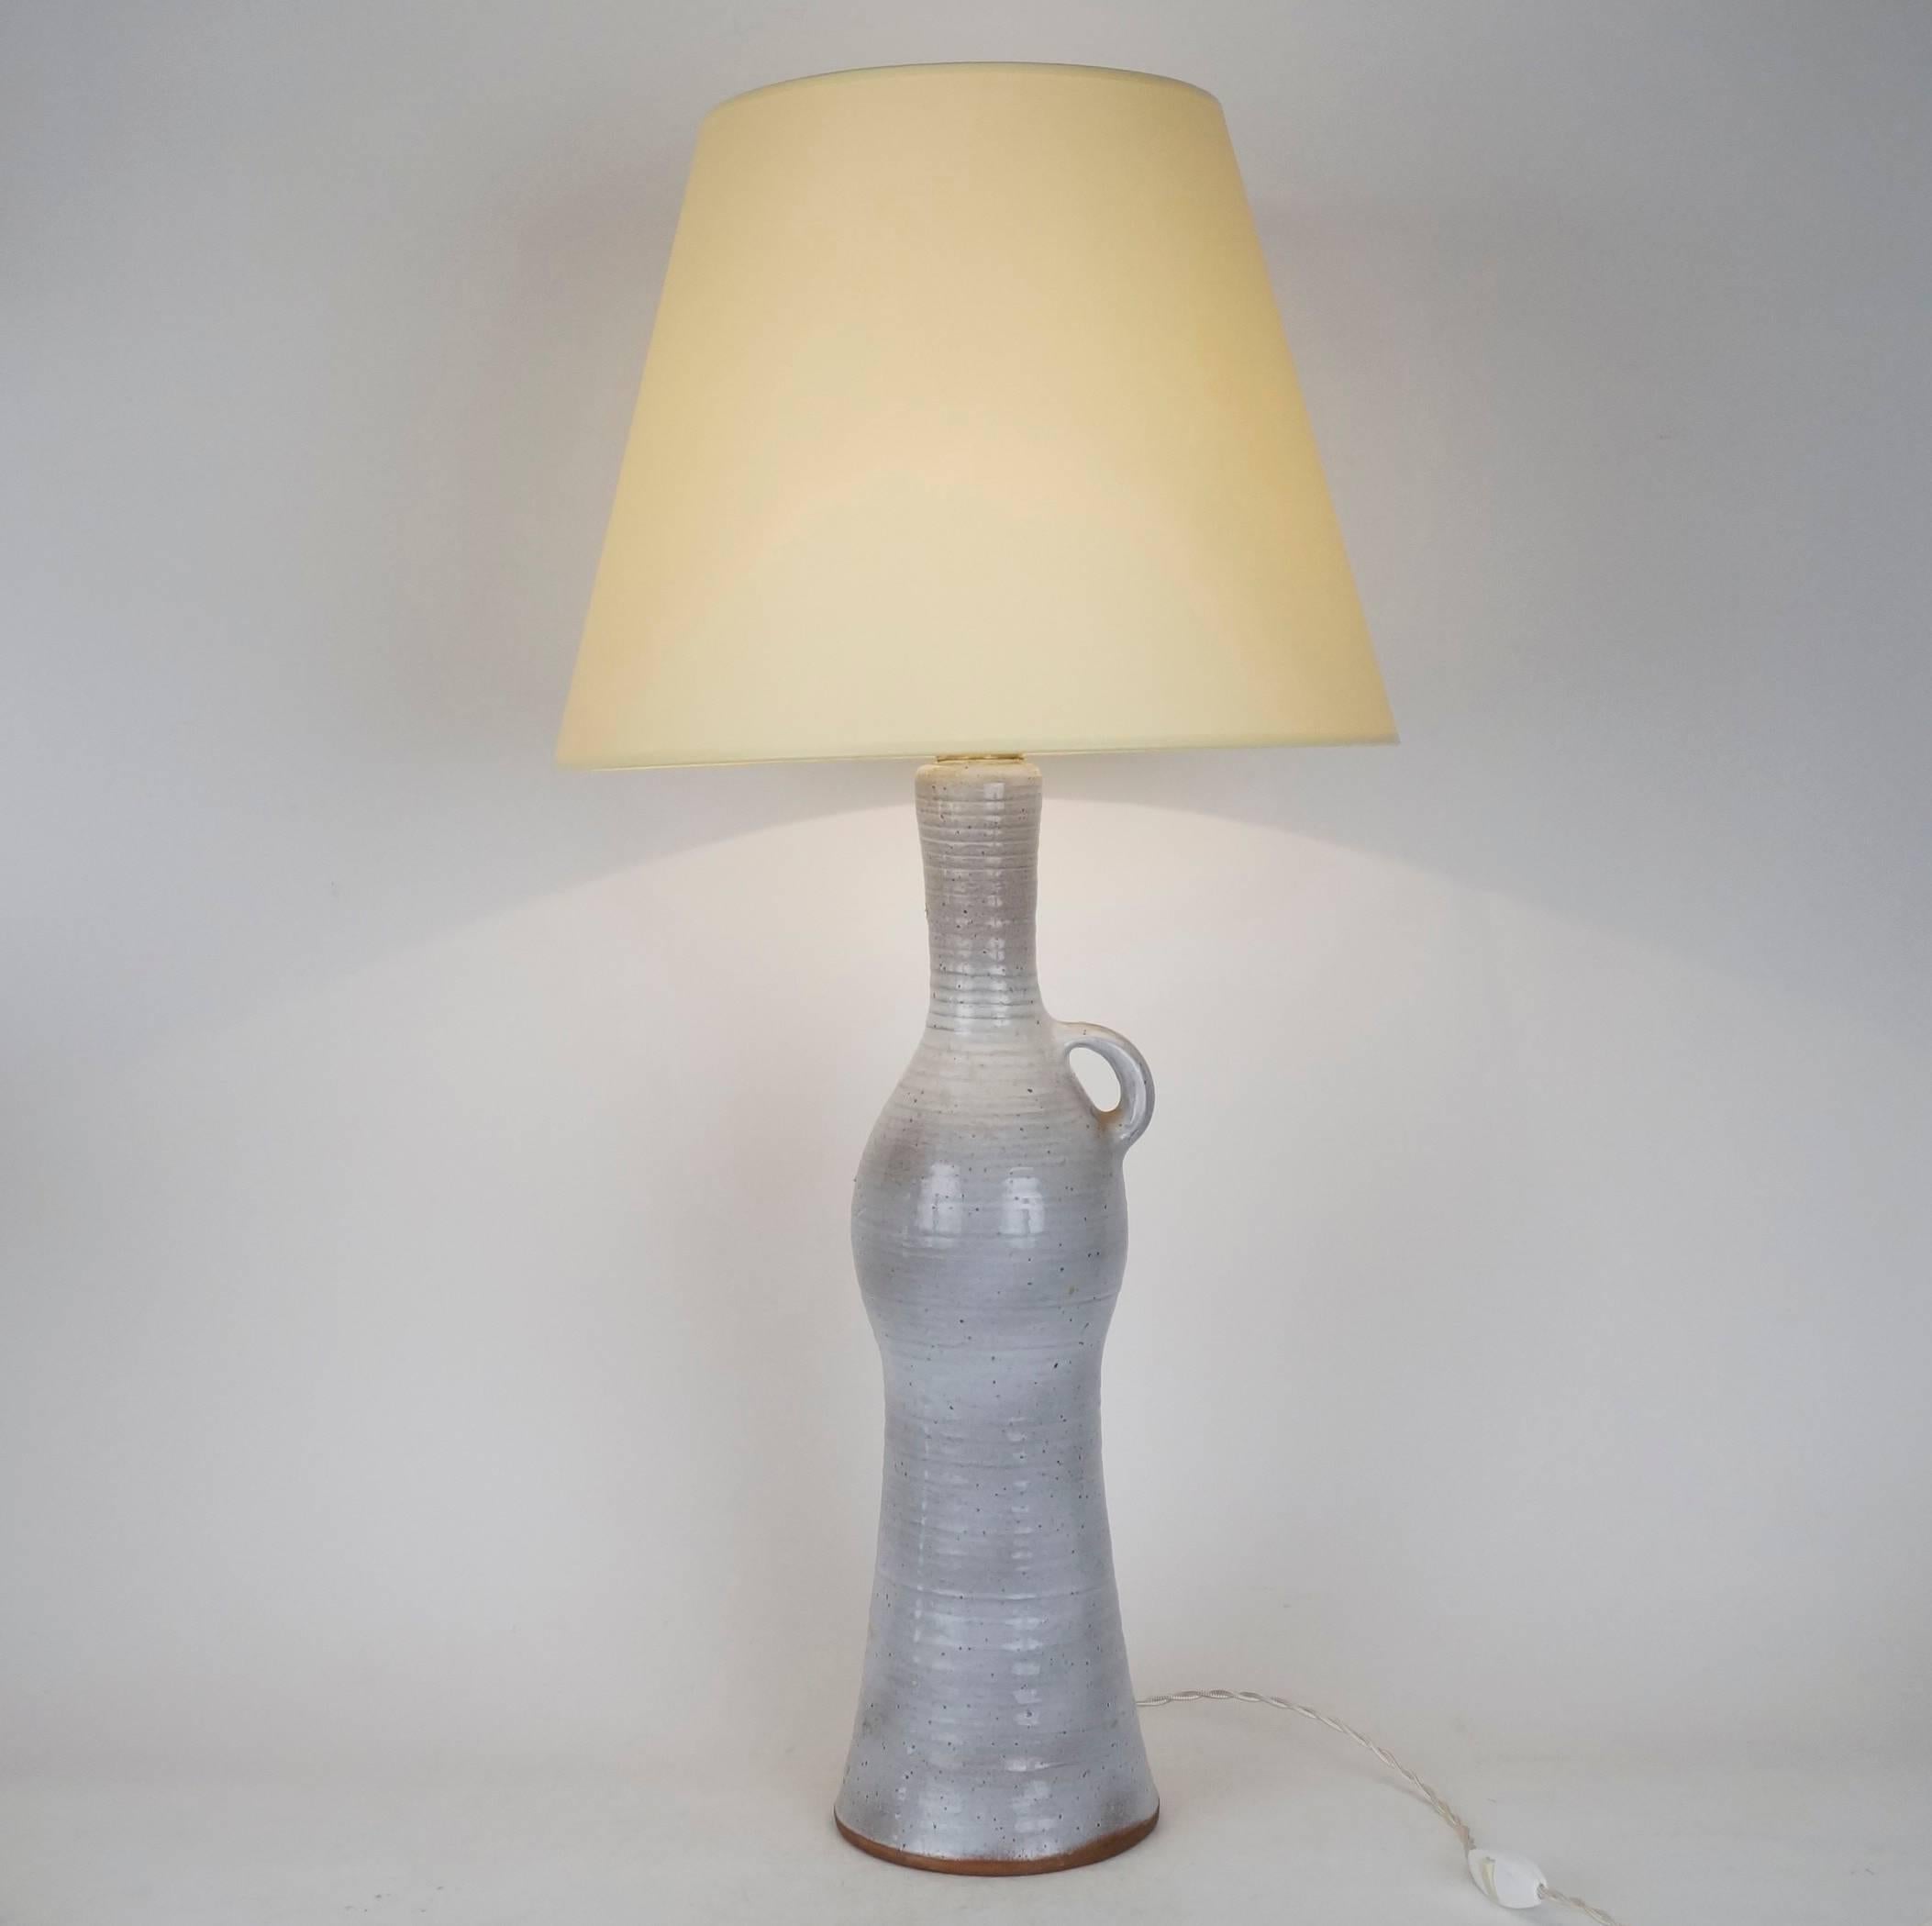 Enamelled ceramic table lamp by Jeanne & Norbert Pierlot (1919-1979) sculptor ceramist founder of the ceramic factory Chateau de Ratilly.
Custom-made fabric lampshades.
Rewired with twisted silk cord.
US standard plug on request.

Ceramic: 47